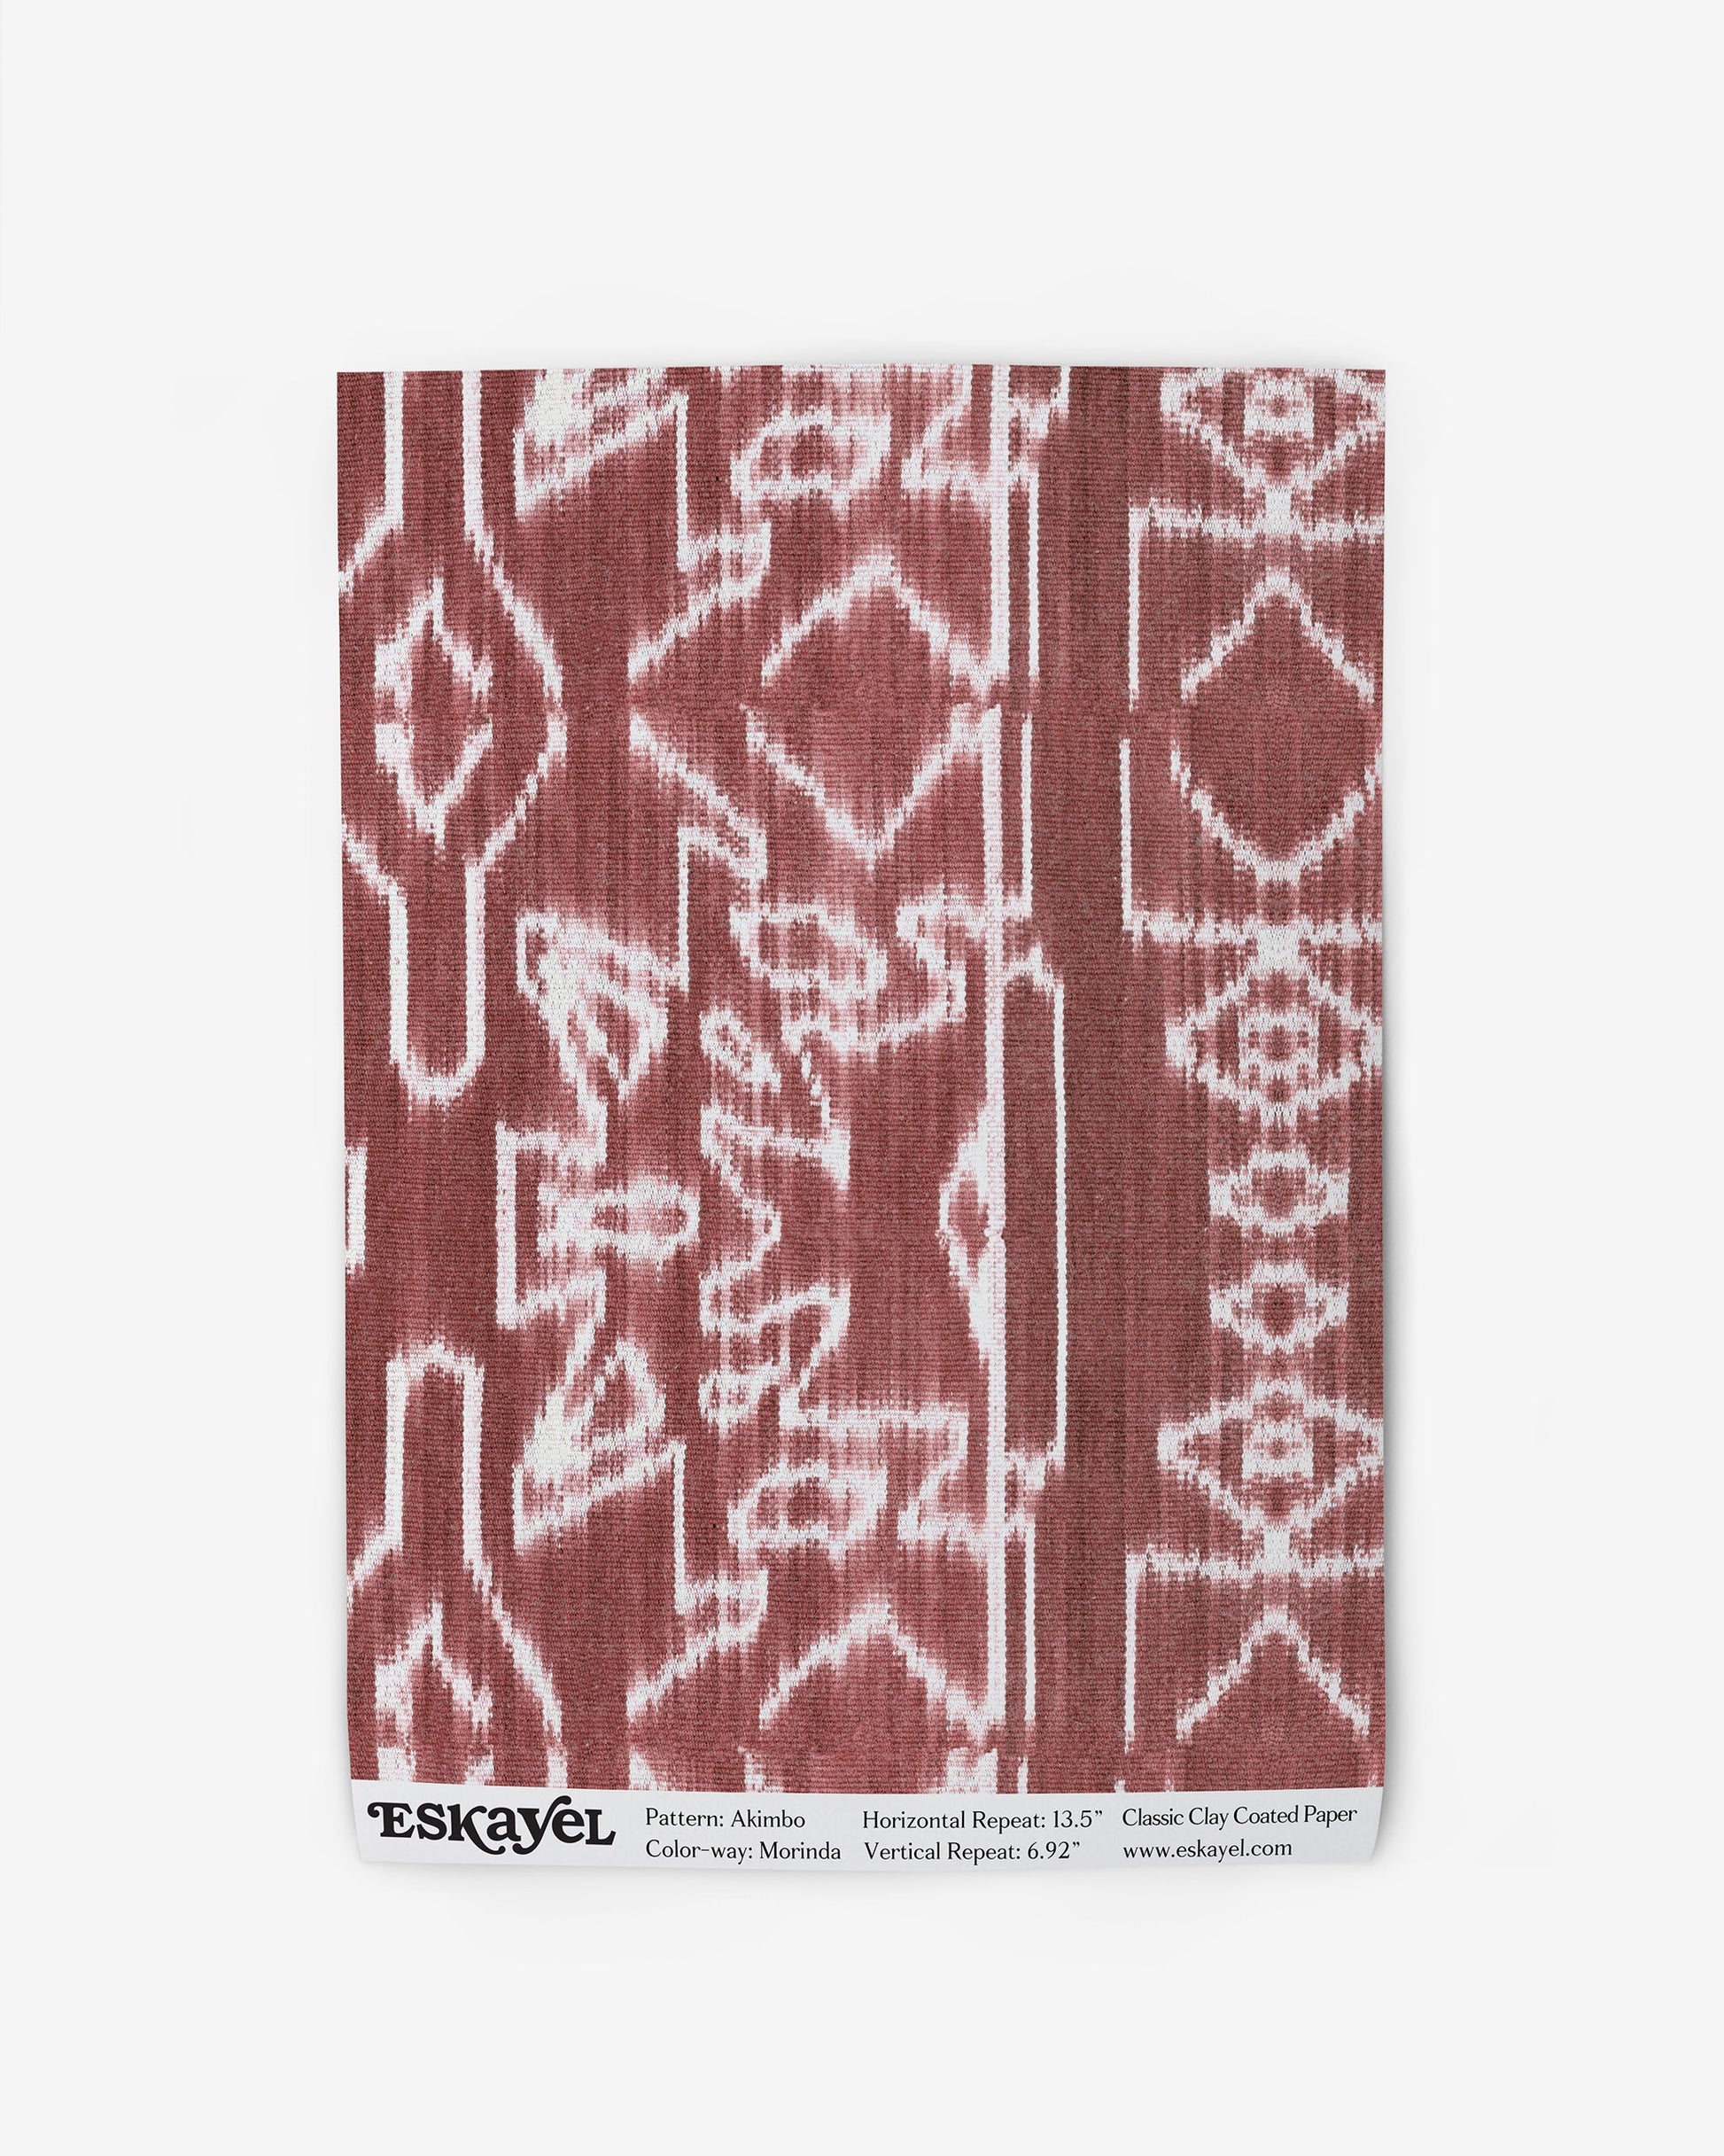 A red and white Akimbo Wallpaper Sample Morinda Ikat pattern on a piece of cloth sample